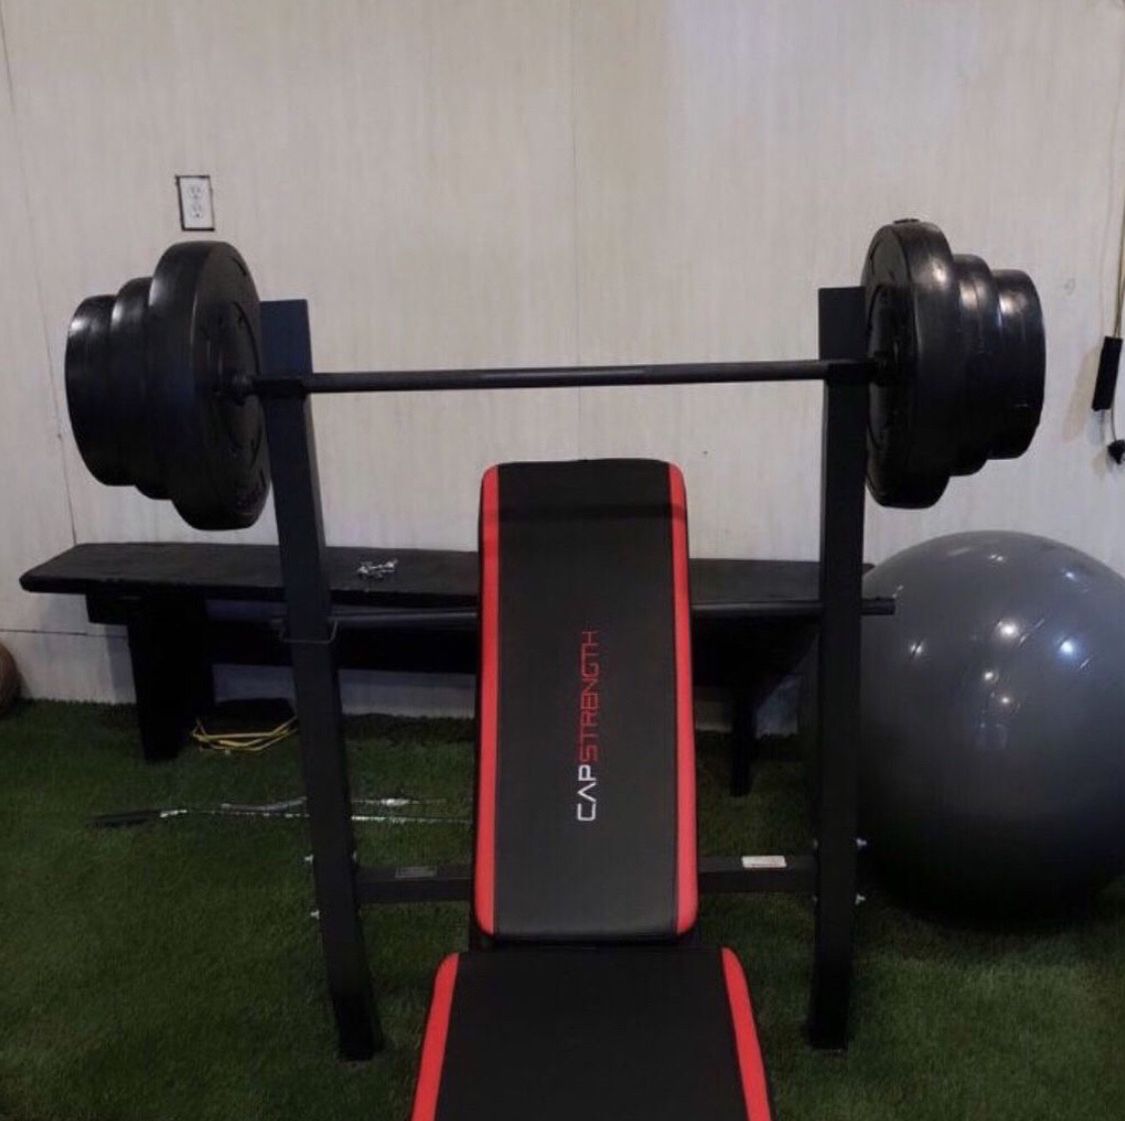 Gym Equipment Adjustable Bench press, barbell, leg developer and 100lbs of weight